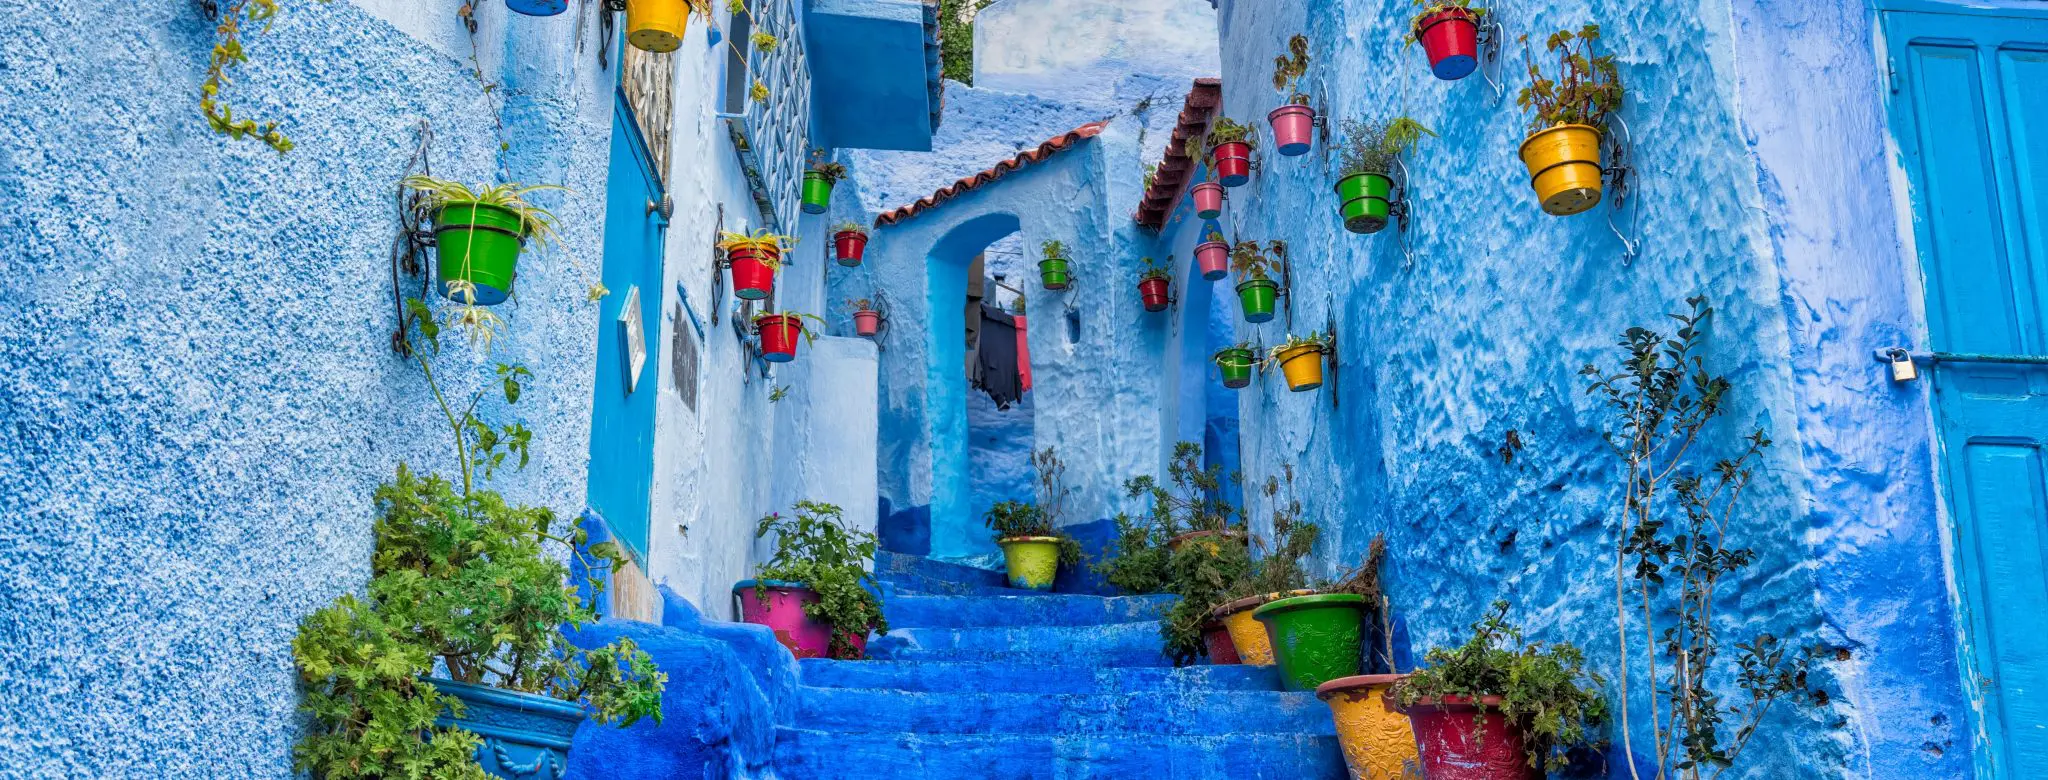 Important Things to Know Before Visiting Morocco